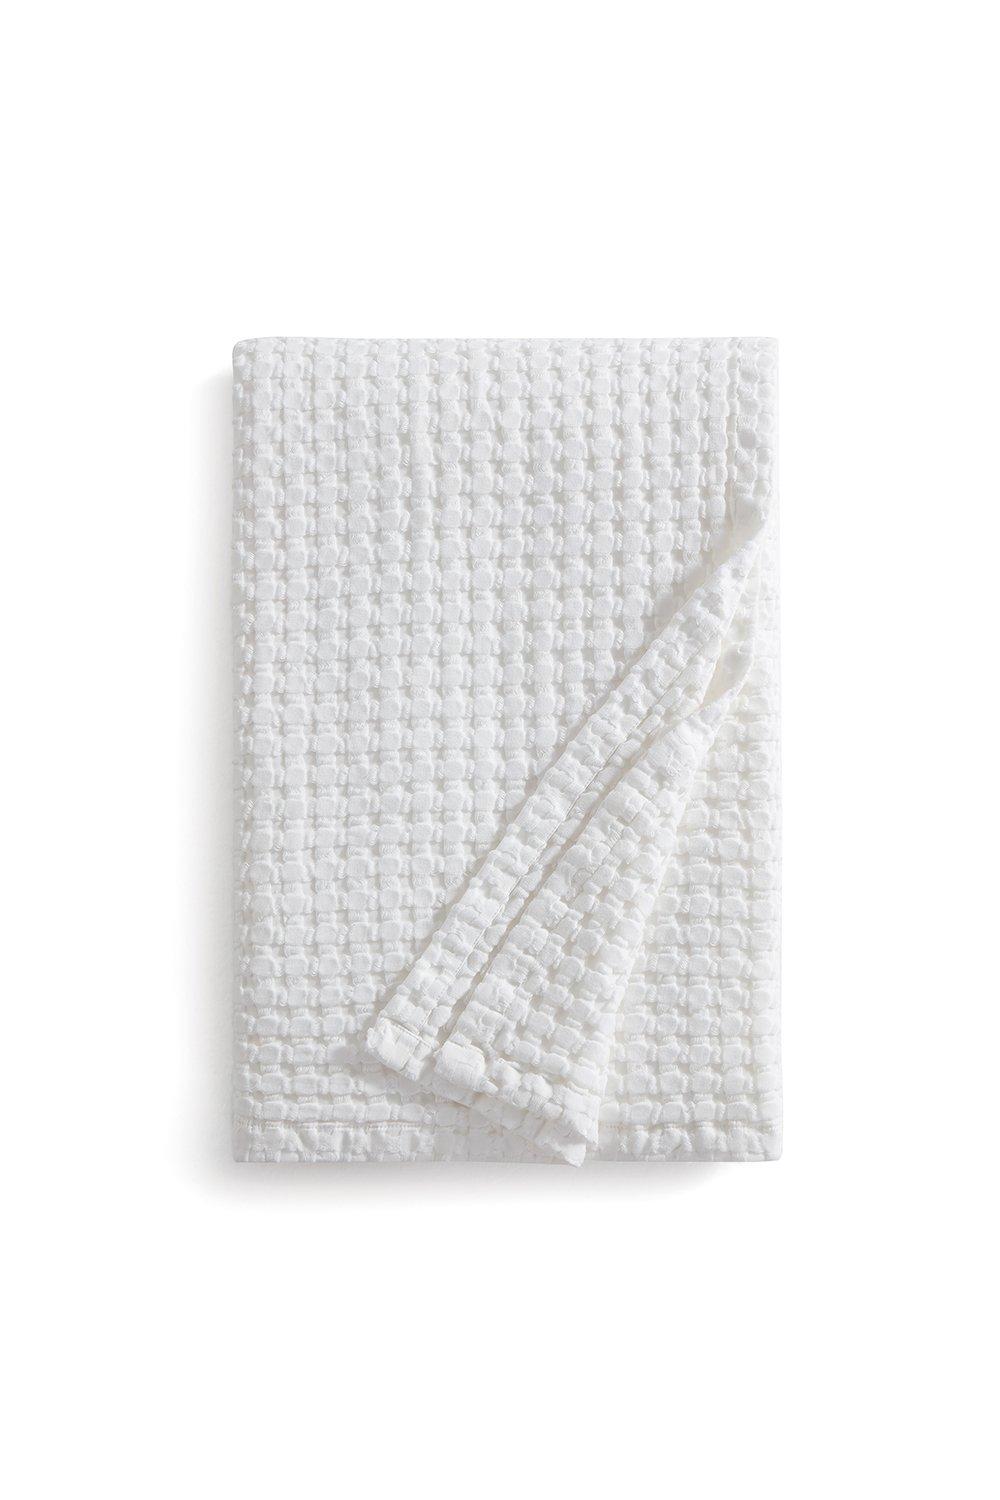 'Dkny Pure Waffle' Cotton Blanket White